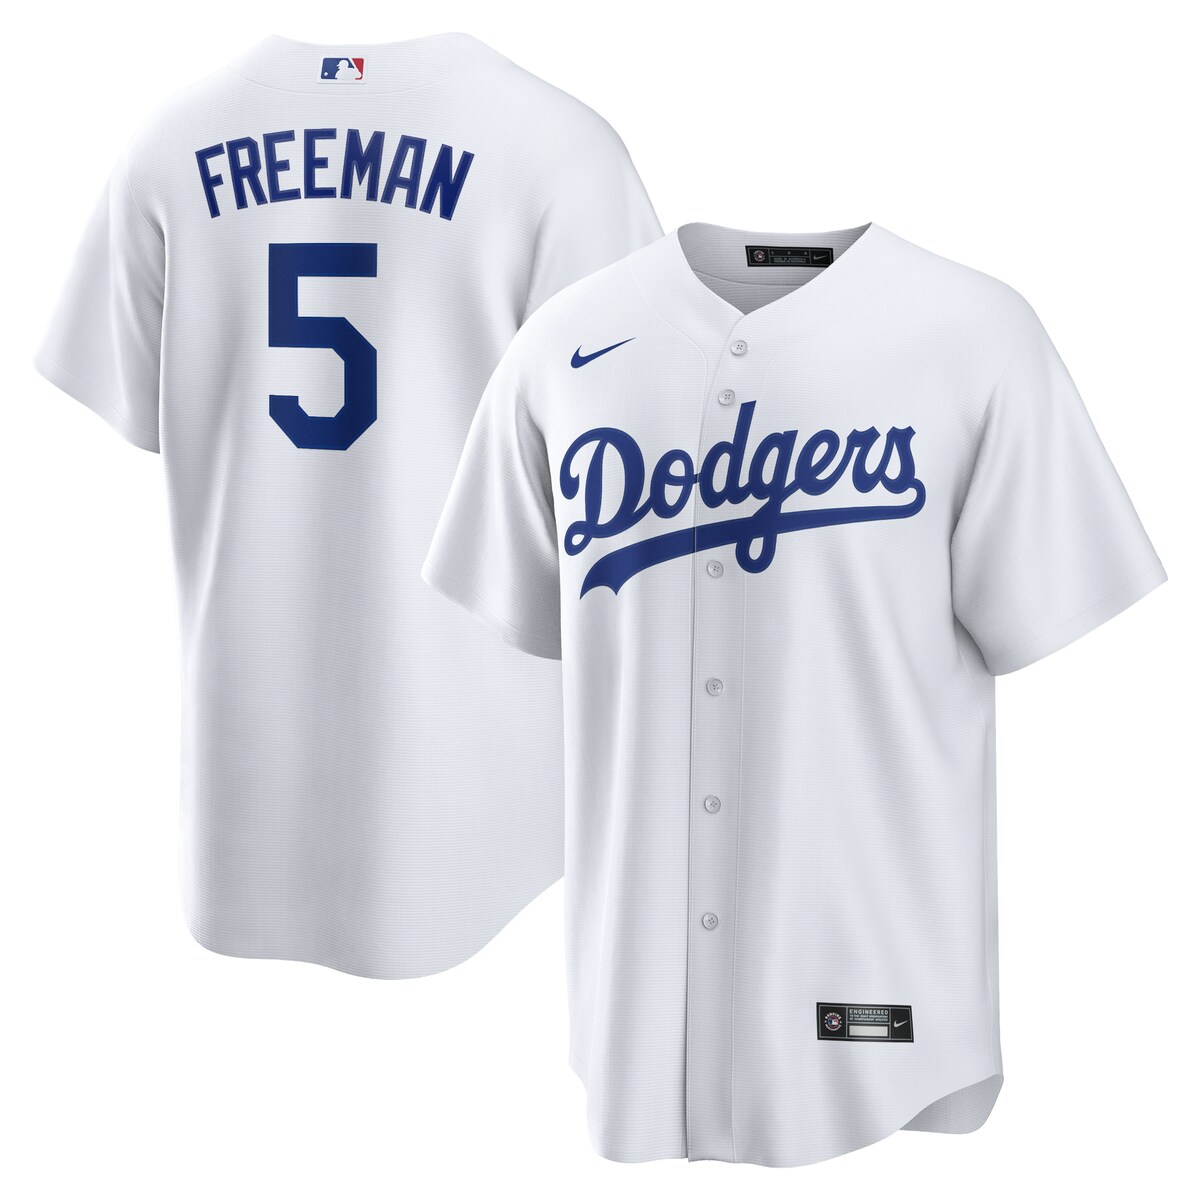 Your Los Angeles Dodgers dominate on the diamond, and now you can match the team from anywhere with this Freddie Freeman Replica Player Jersey. This Nike jersey features classic details, like a rounded droptail hem and full-button front. The spirited Los Angeles Dodgers graphics will ensure fellow fans know where your allegiance lies.Tackle twill graphicsReplica JerseyMaterial: 100% PolyesterOfficially licensedMachine wash gentle or dry clean. Tumble dry low, hang dry preferred.Brand: NikeImportedHeat-sealed jock tag at hemRounded droptail hemFull-button frontShort sleeve